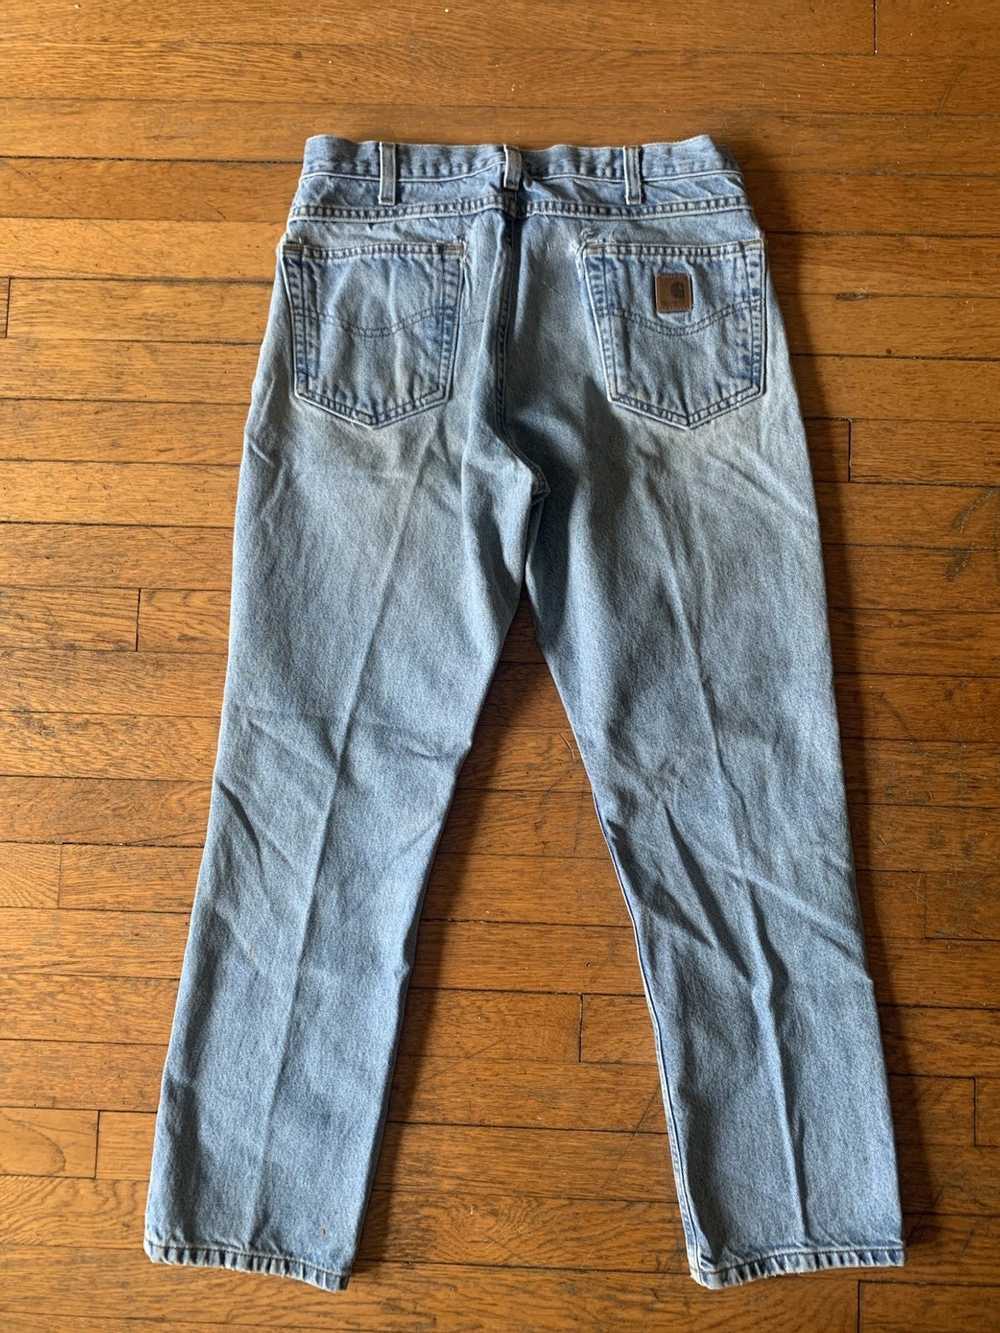 Carhartt Carhartt Patched Repaired Denim Blue Jea… - image 4